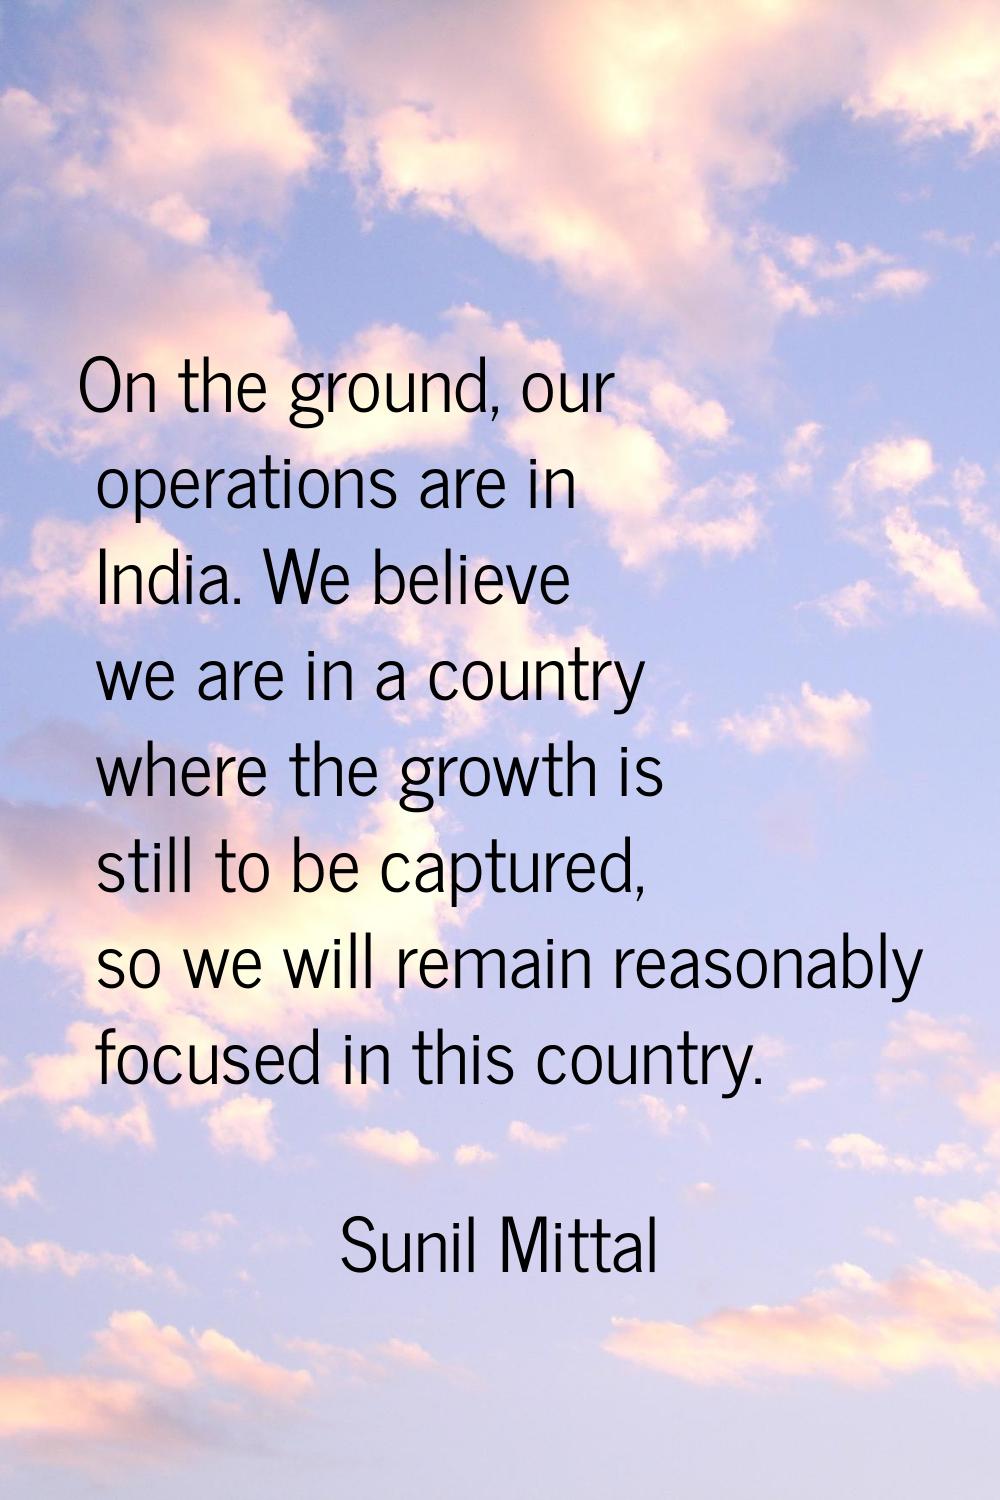 On the ground, our operations are in India. We believe we are in a country where the growth is stil